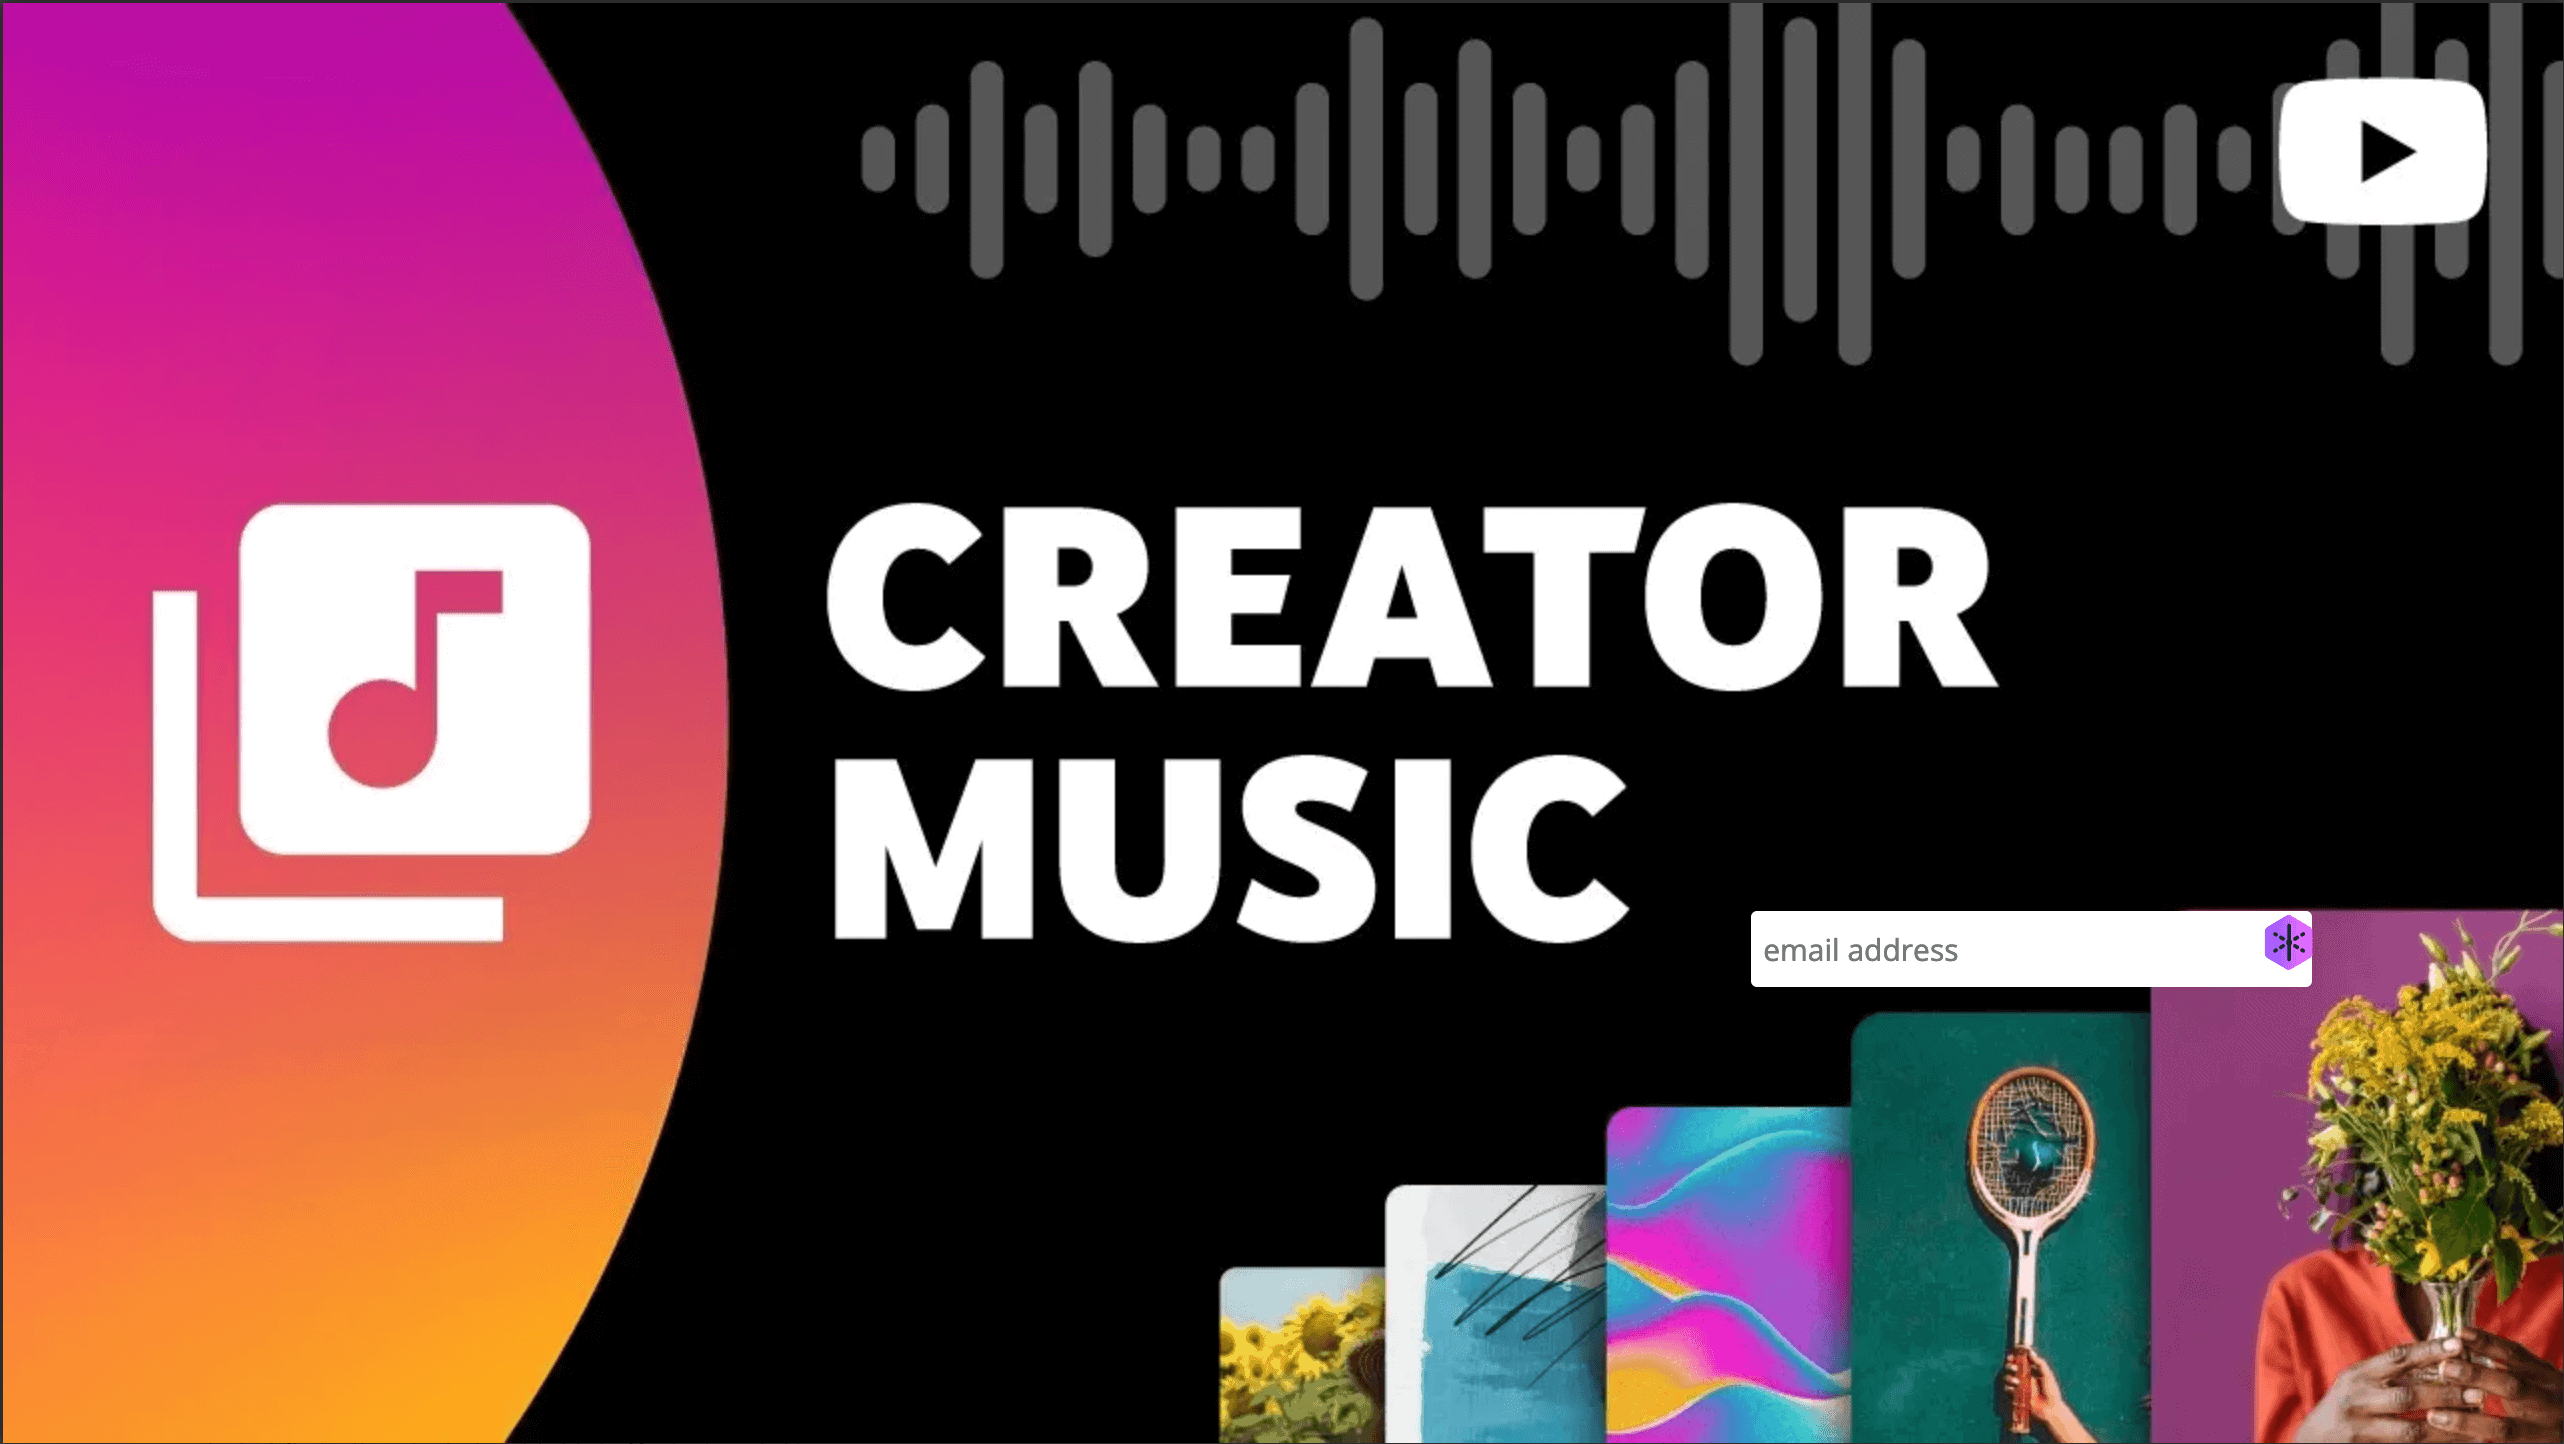 YouTube unveils 'Creator Music' to help creators find songs for content